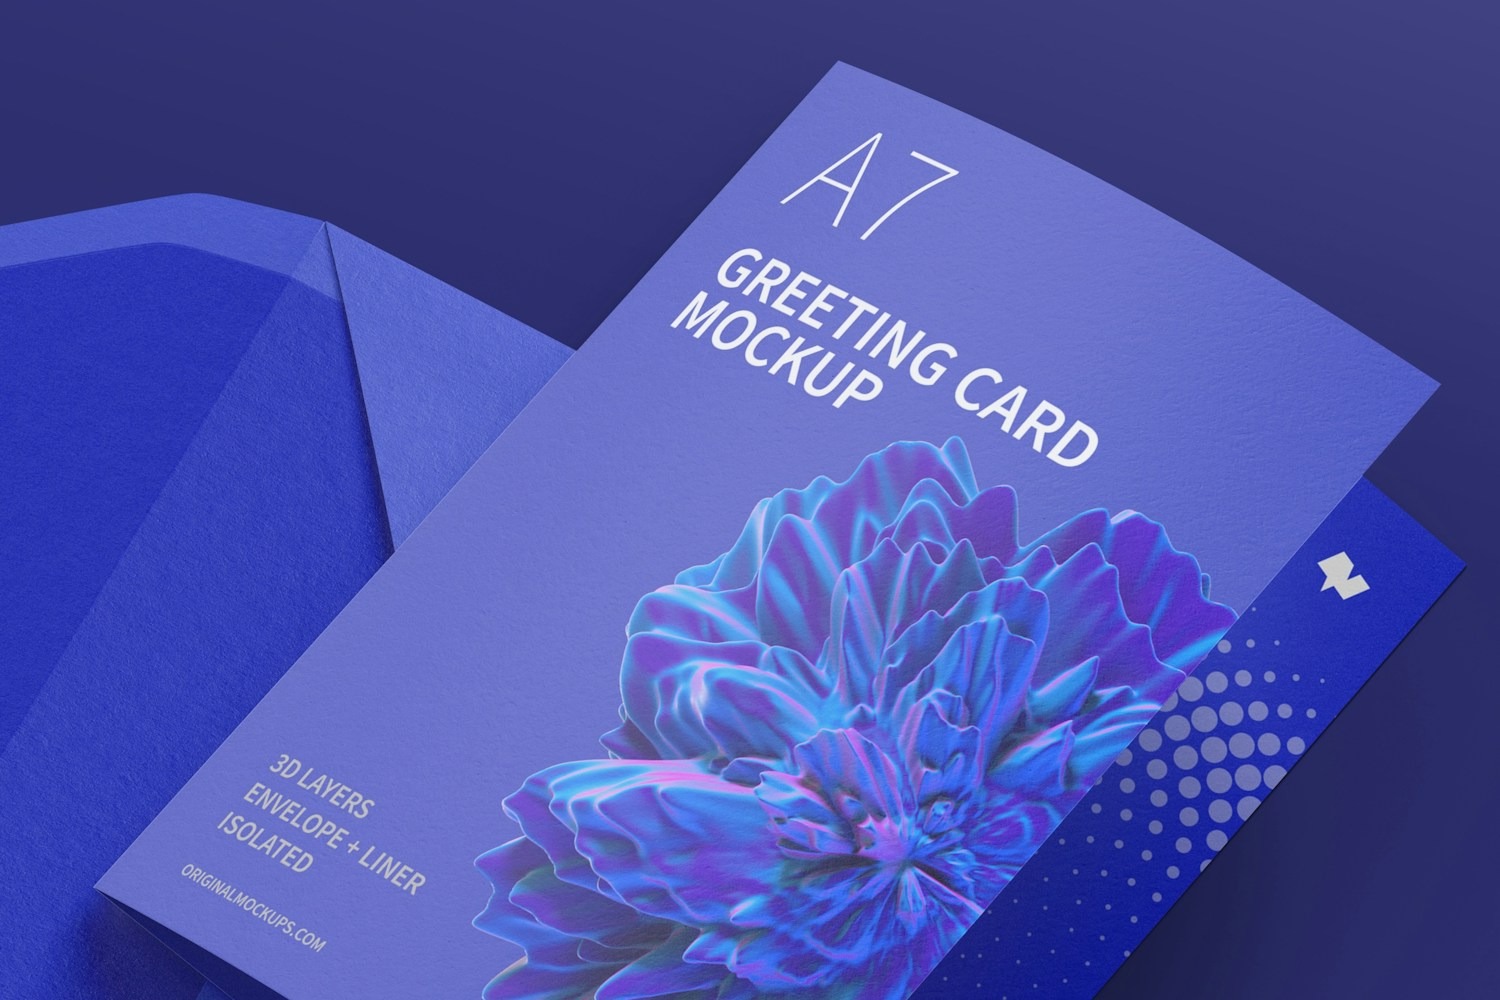 A7 Greeting Card Mockup with Envelope, Closed